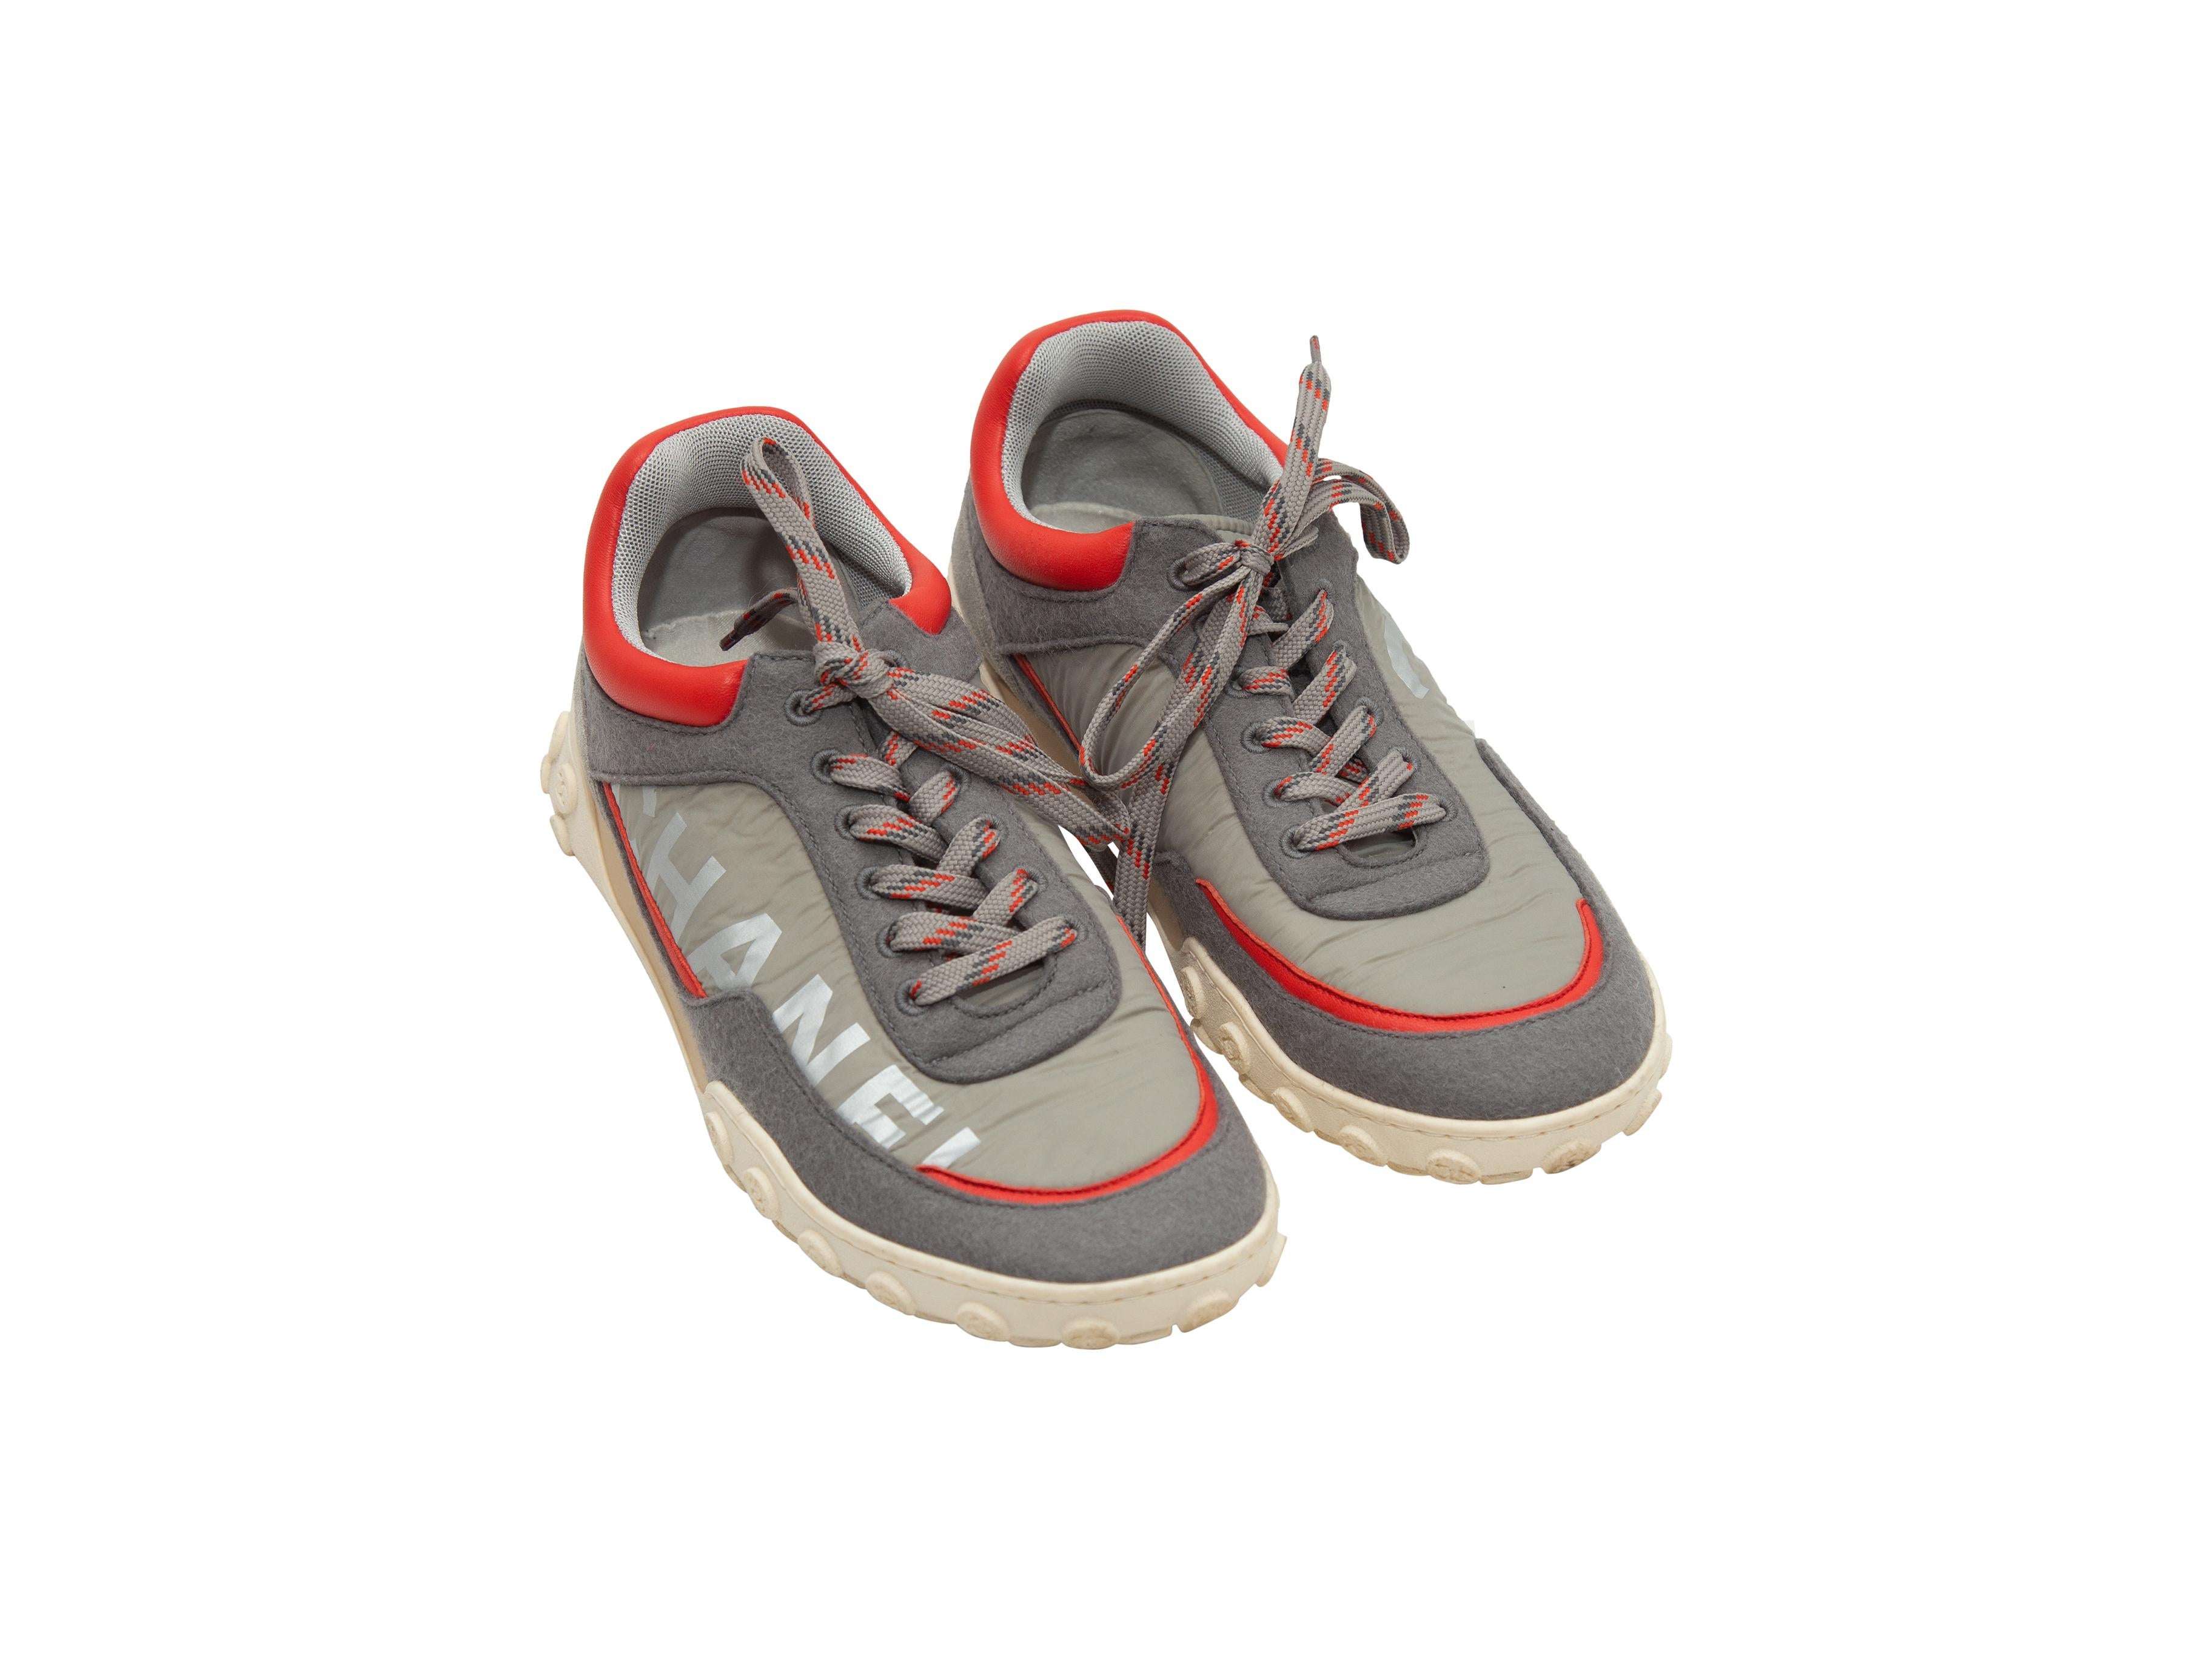 Product details: Grey and red fabric low-top sneakers by Chanel. Circa 2019. Leather and suede trim throughout. Rubber soles. Lace-up tie closures at tops. Designer size 39.5. 1